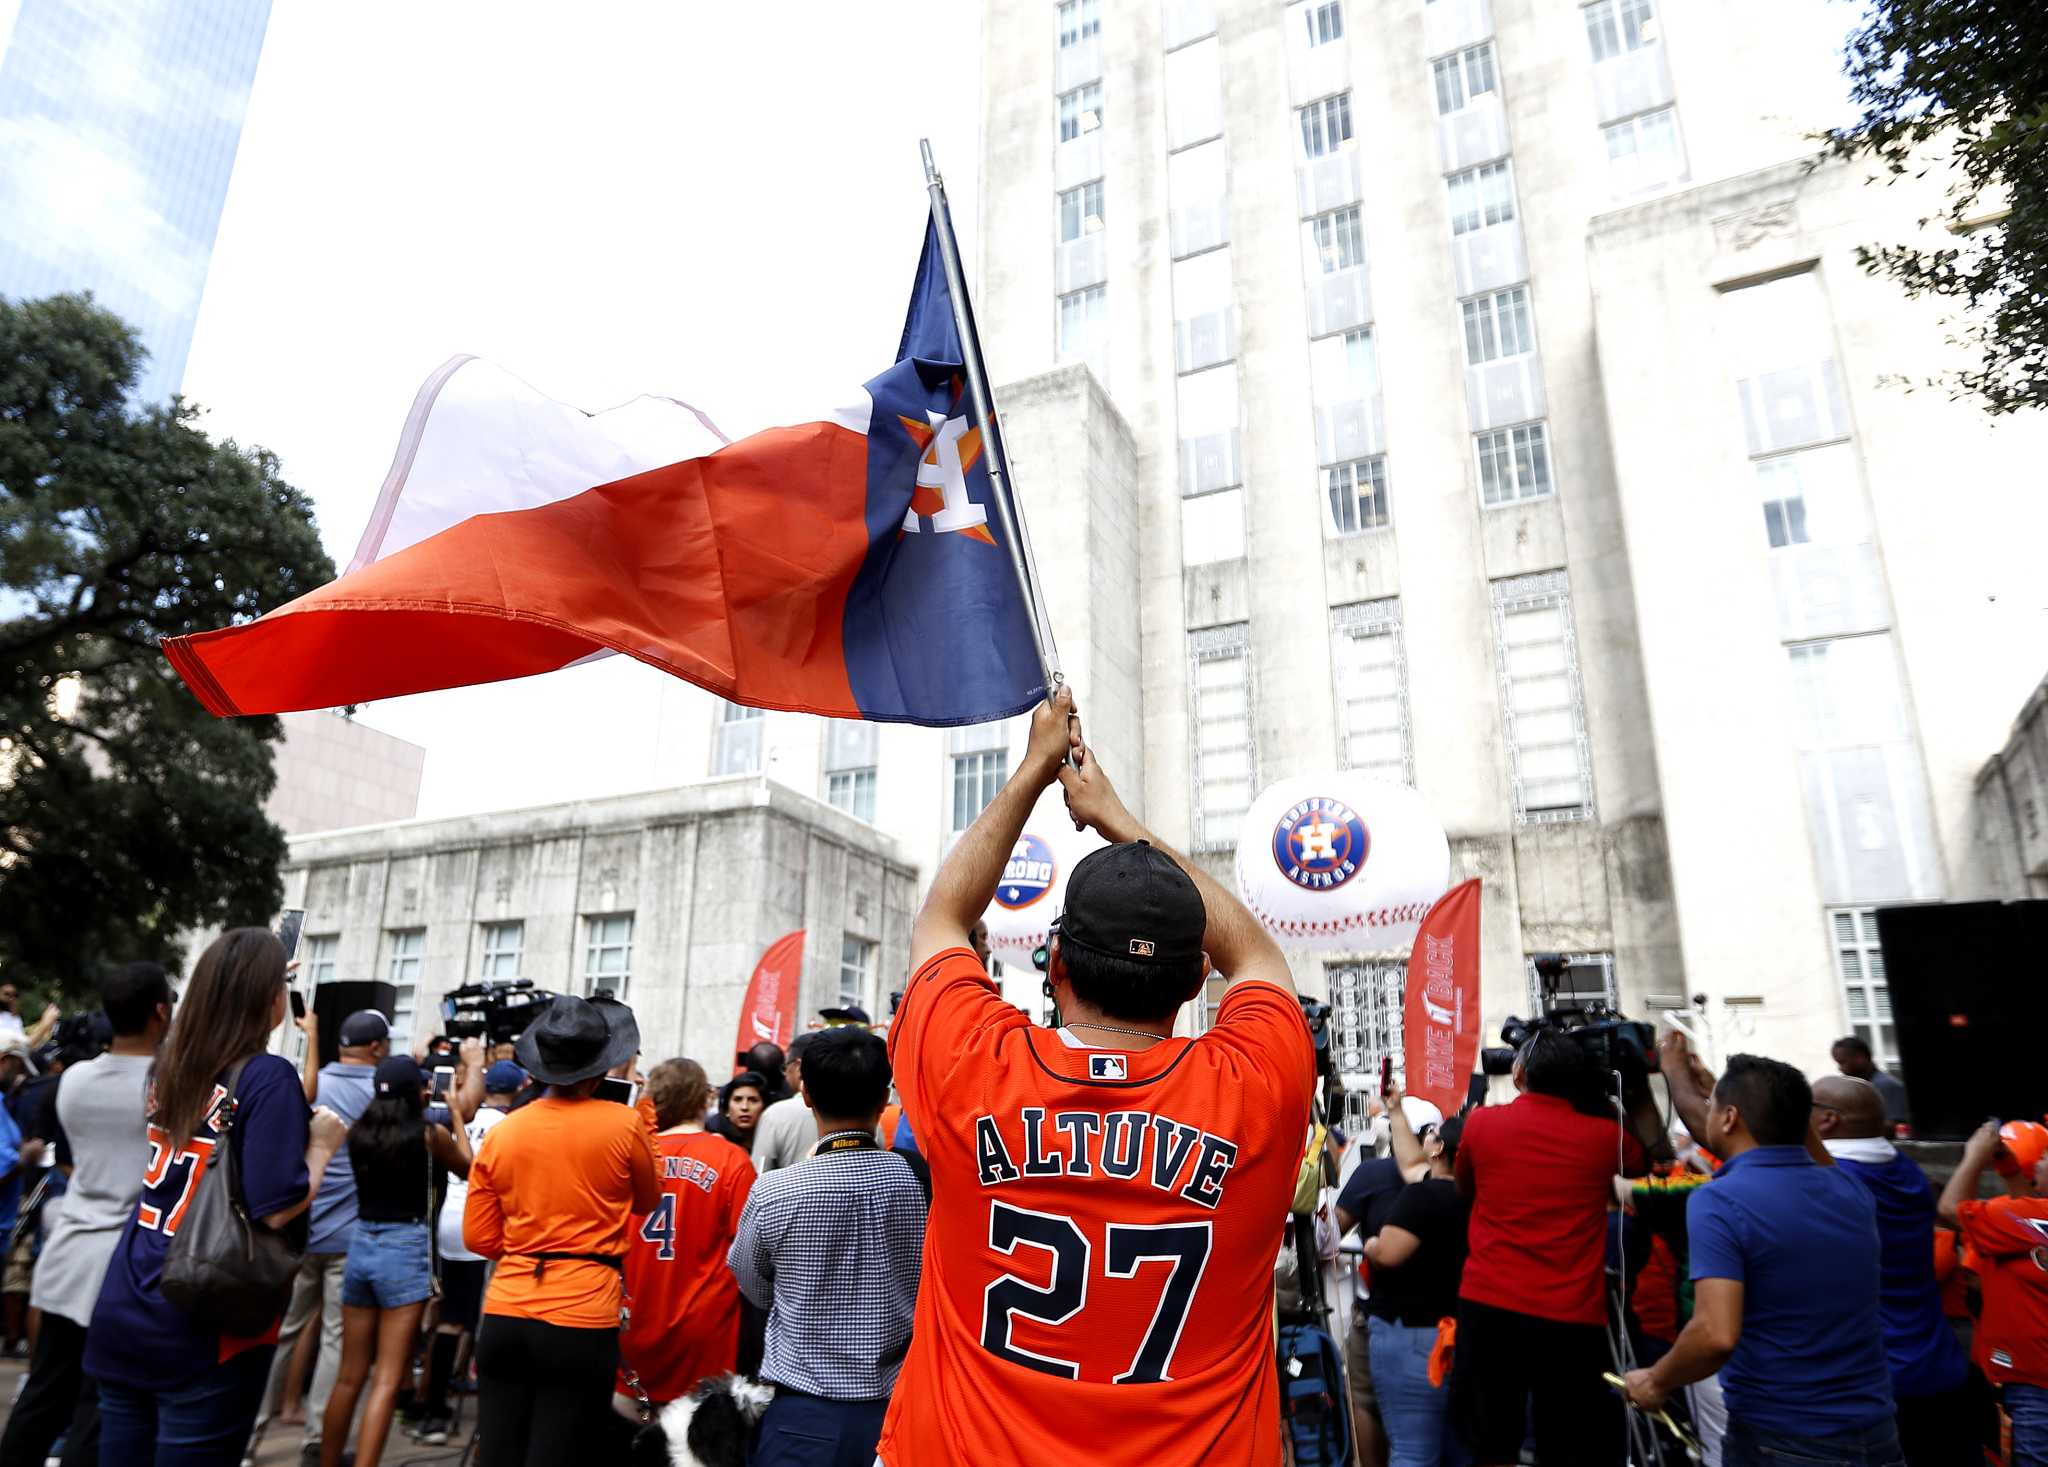 City of Houston hosts big downtown rally for AL West champs Houston Astros  - ABC13 Houston